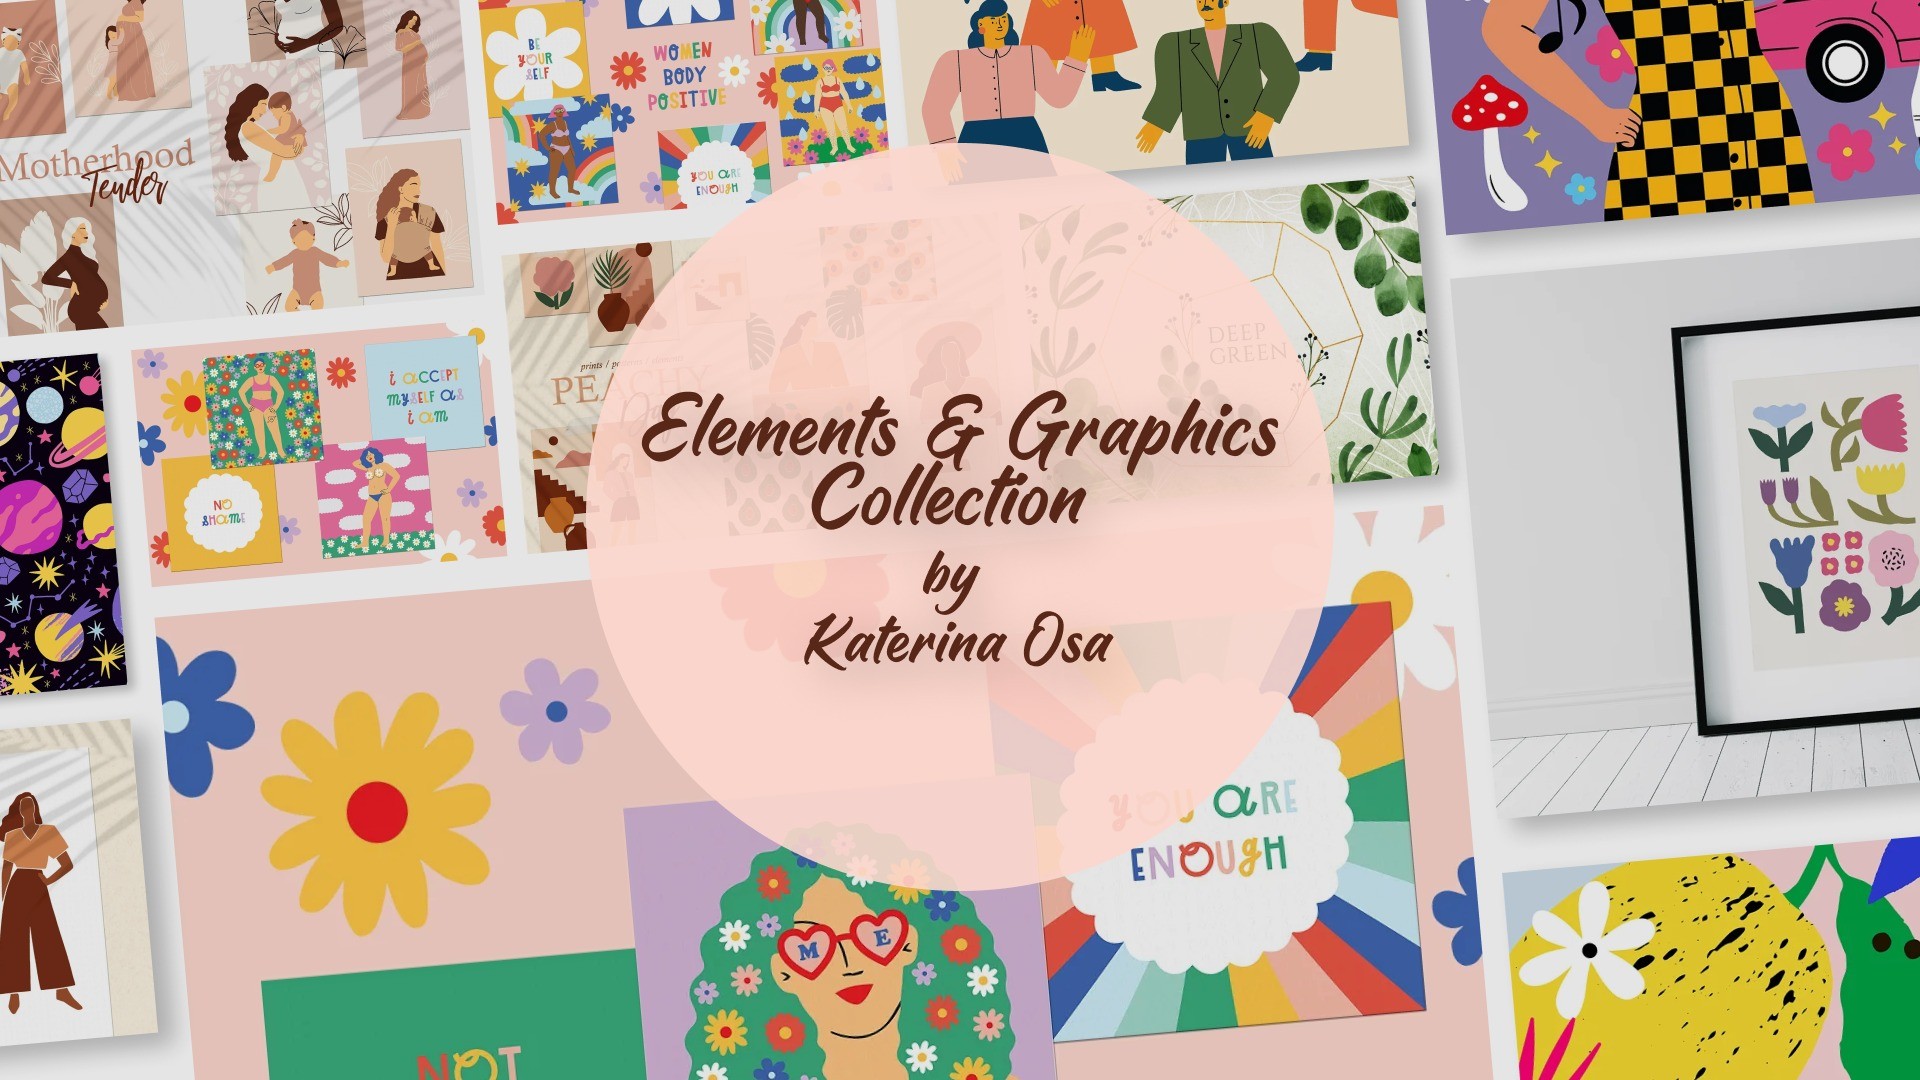 Elements & Graphics collection by Katerina Osa